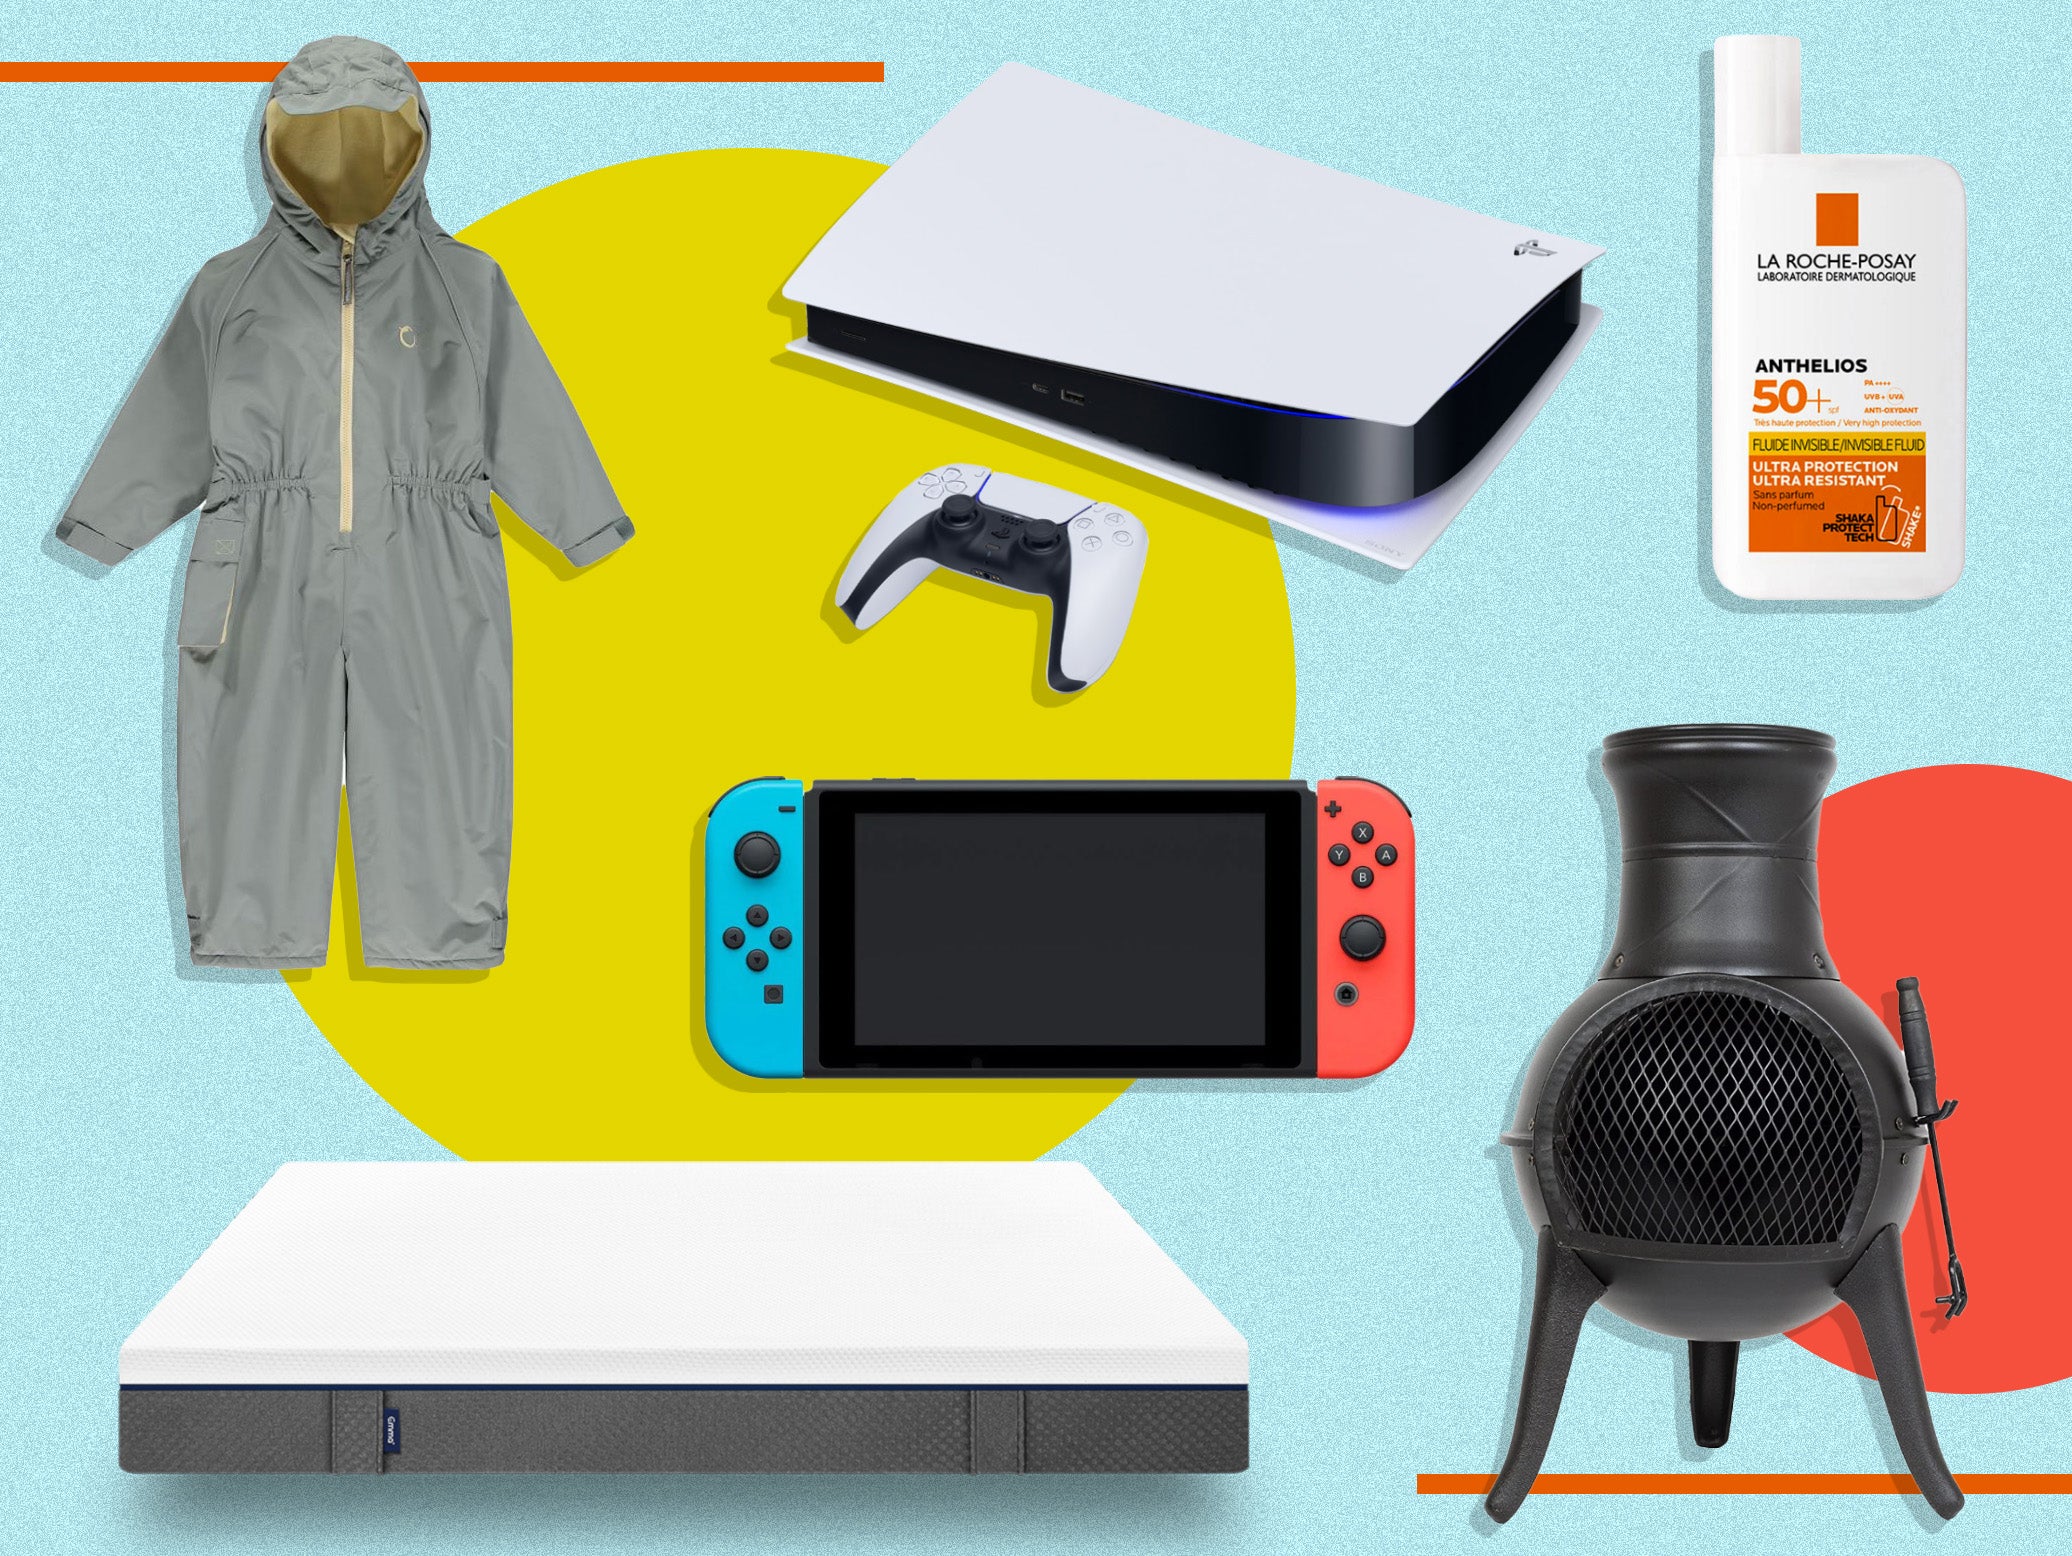 During another turbulent year, games consoles, mattresses and skincare were big hitters